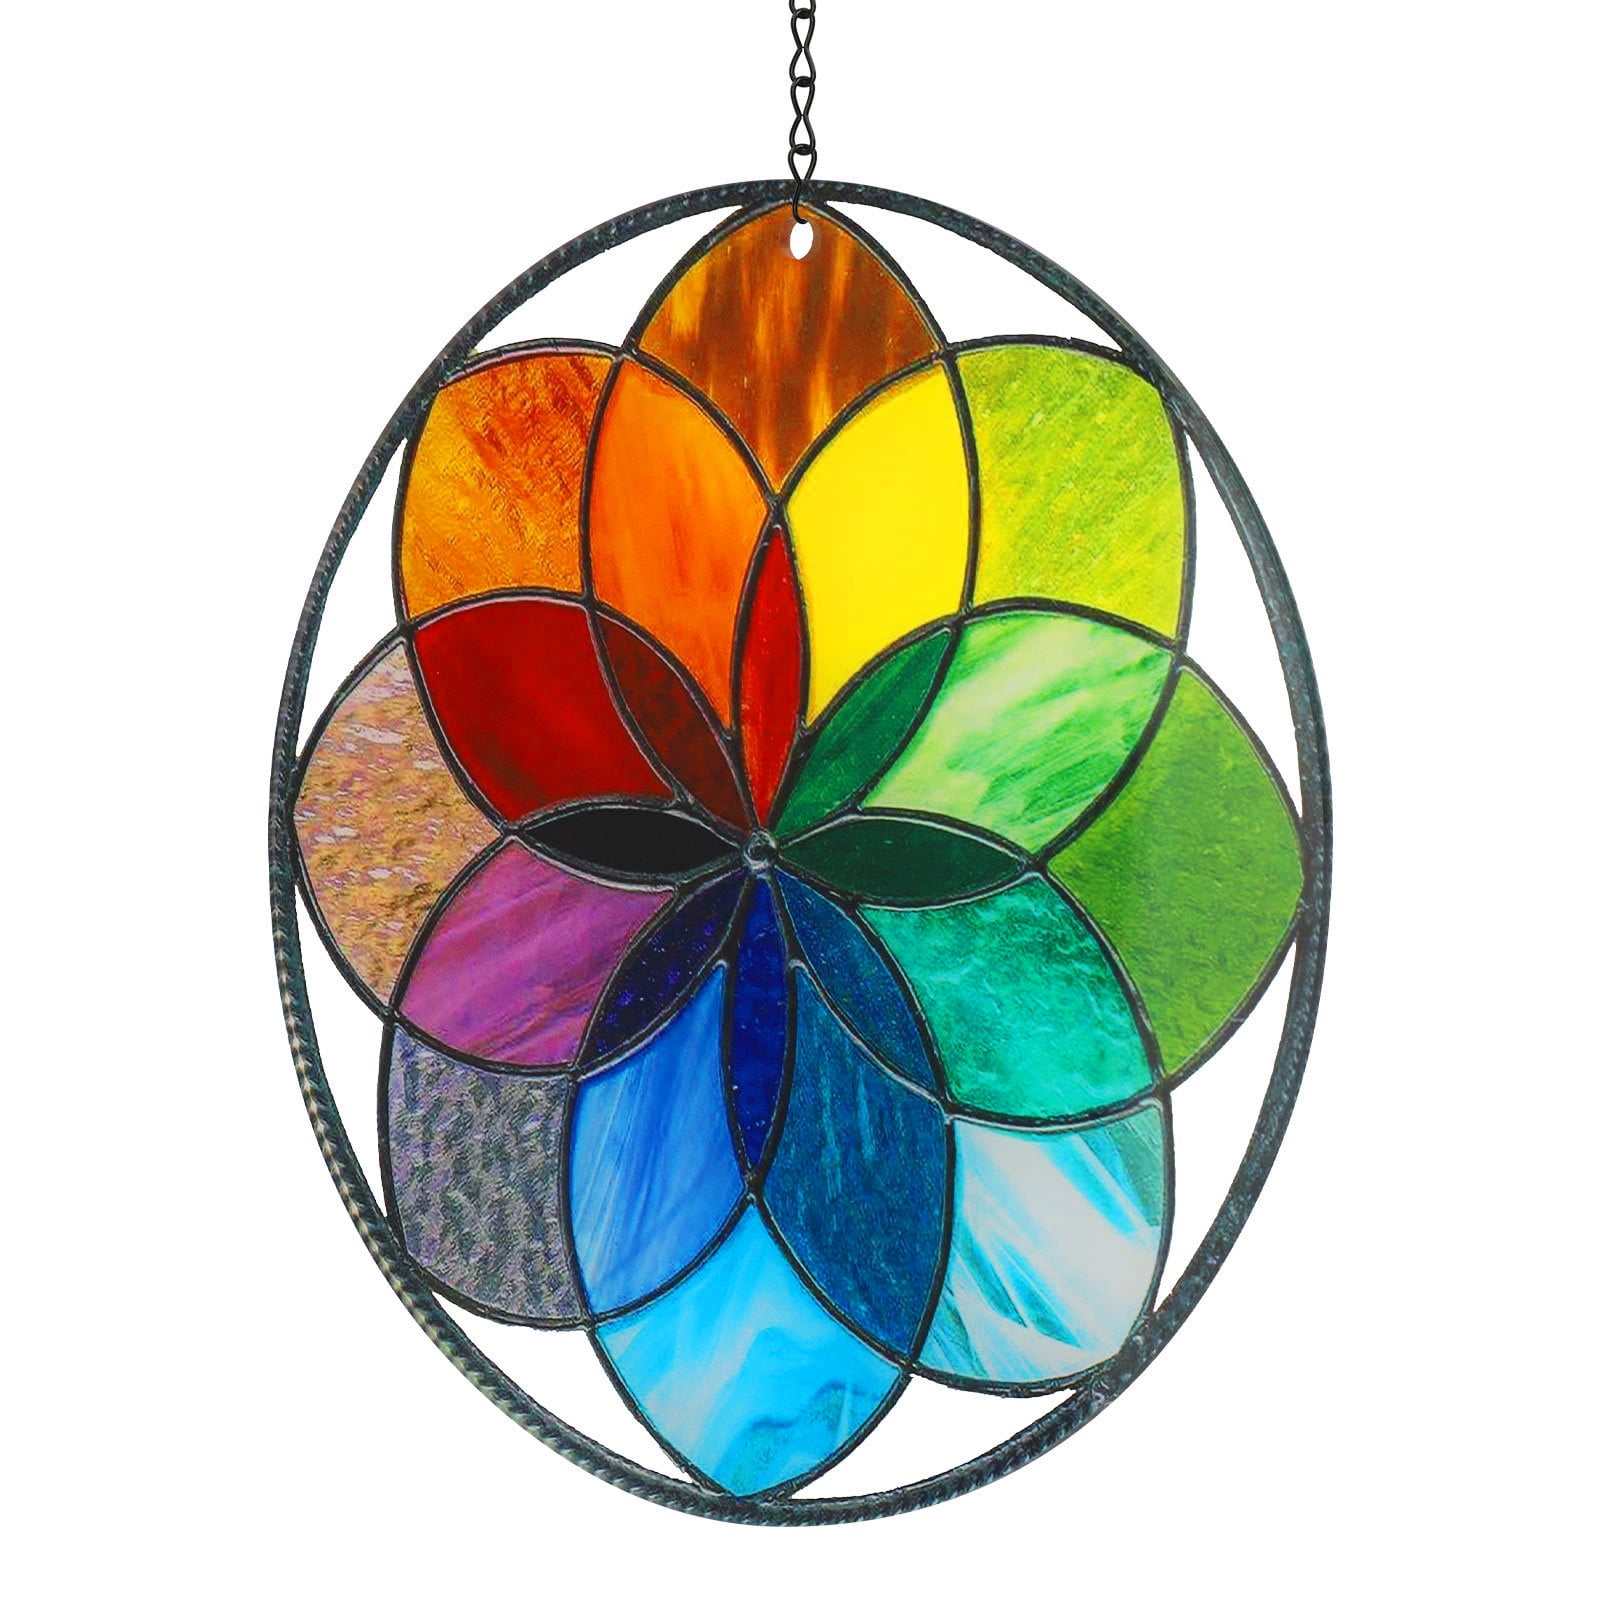 H&D Handcrafted Window Hangings Heart Stained Glass Panel Ornament  Rainbow Maker Suncatcher for Home Wall Decor Christmas Gift - AliExpress